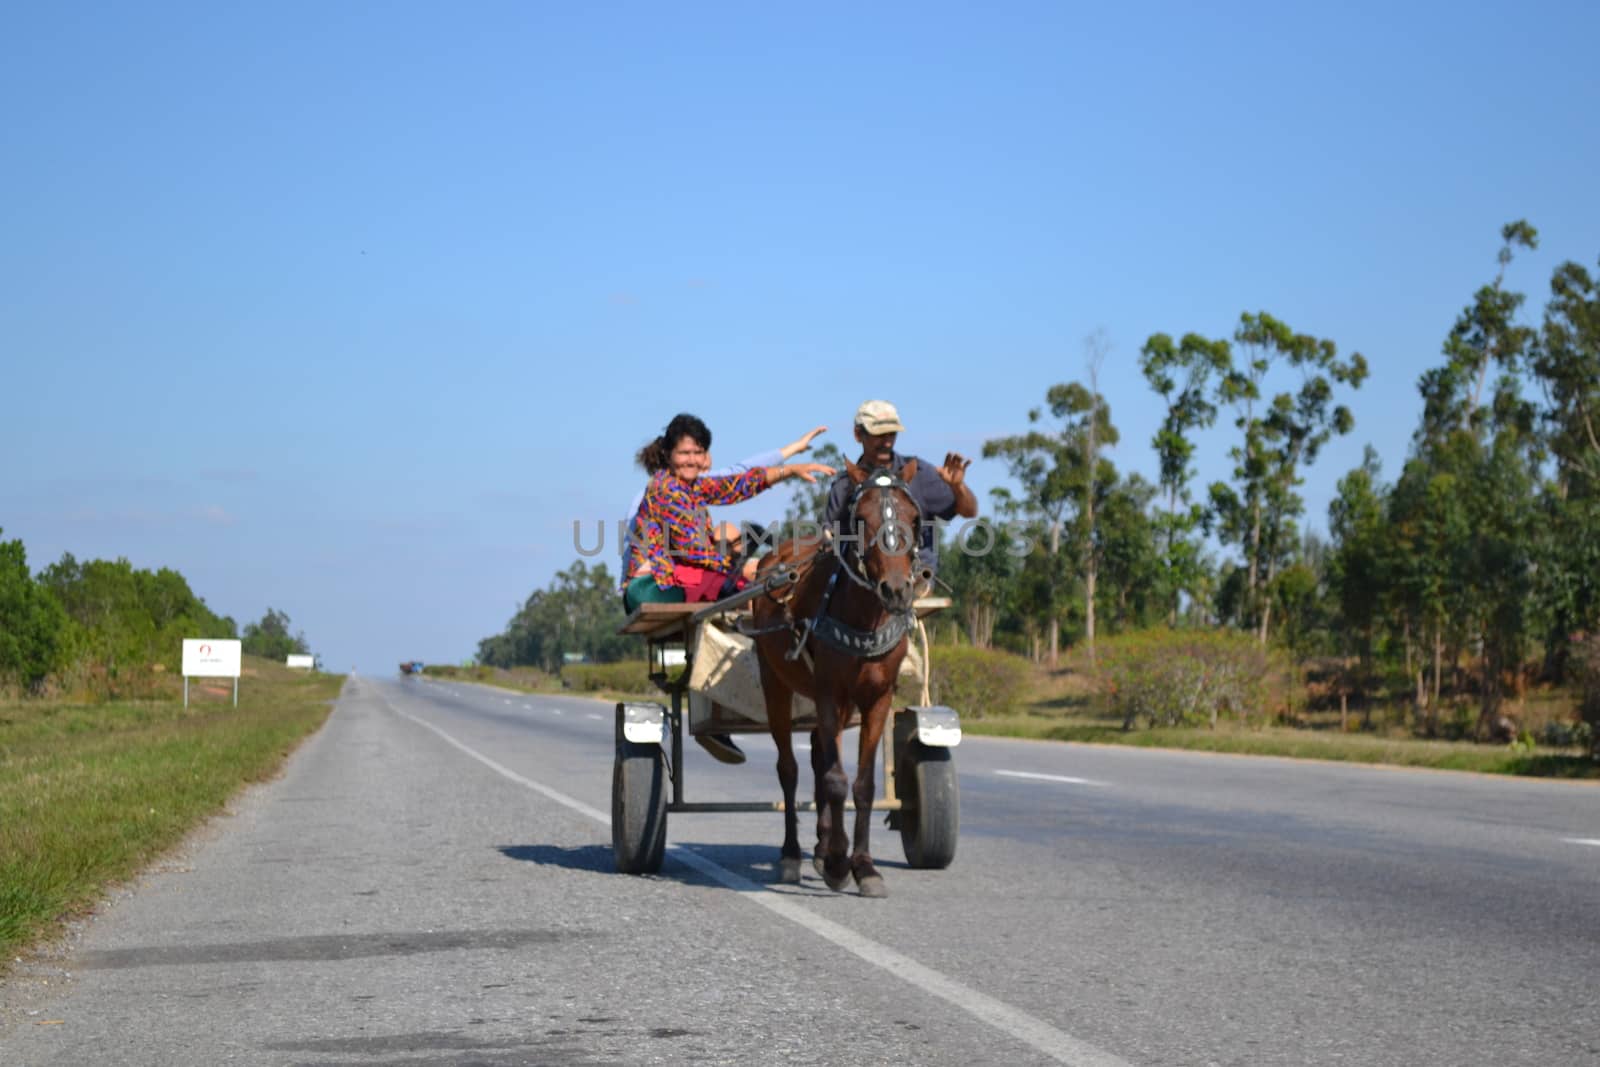 Horse carriage on the cuban roads by kb79